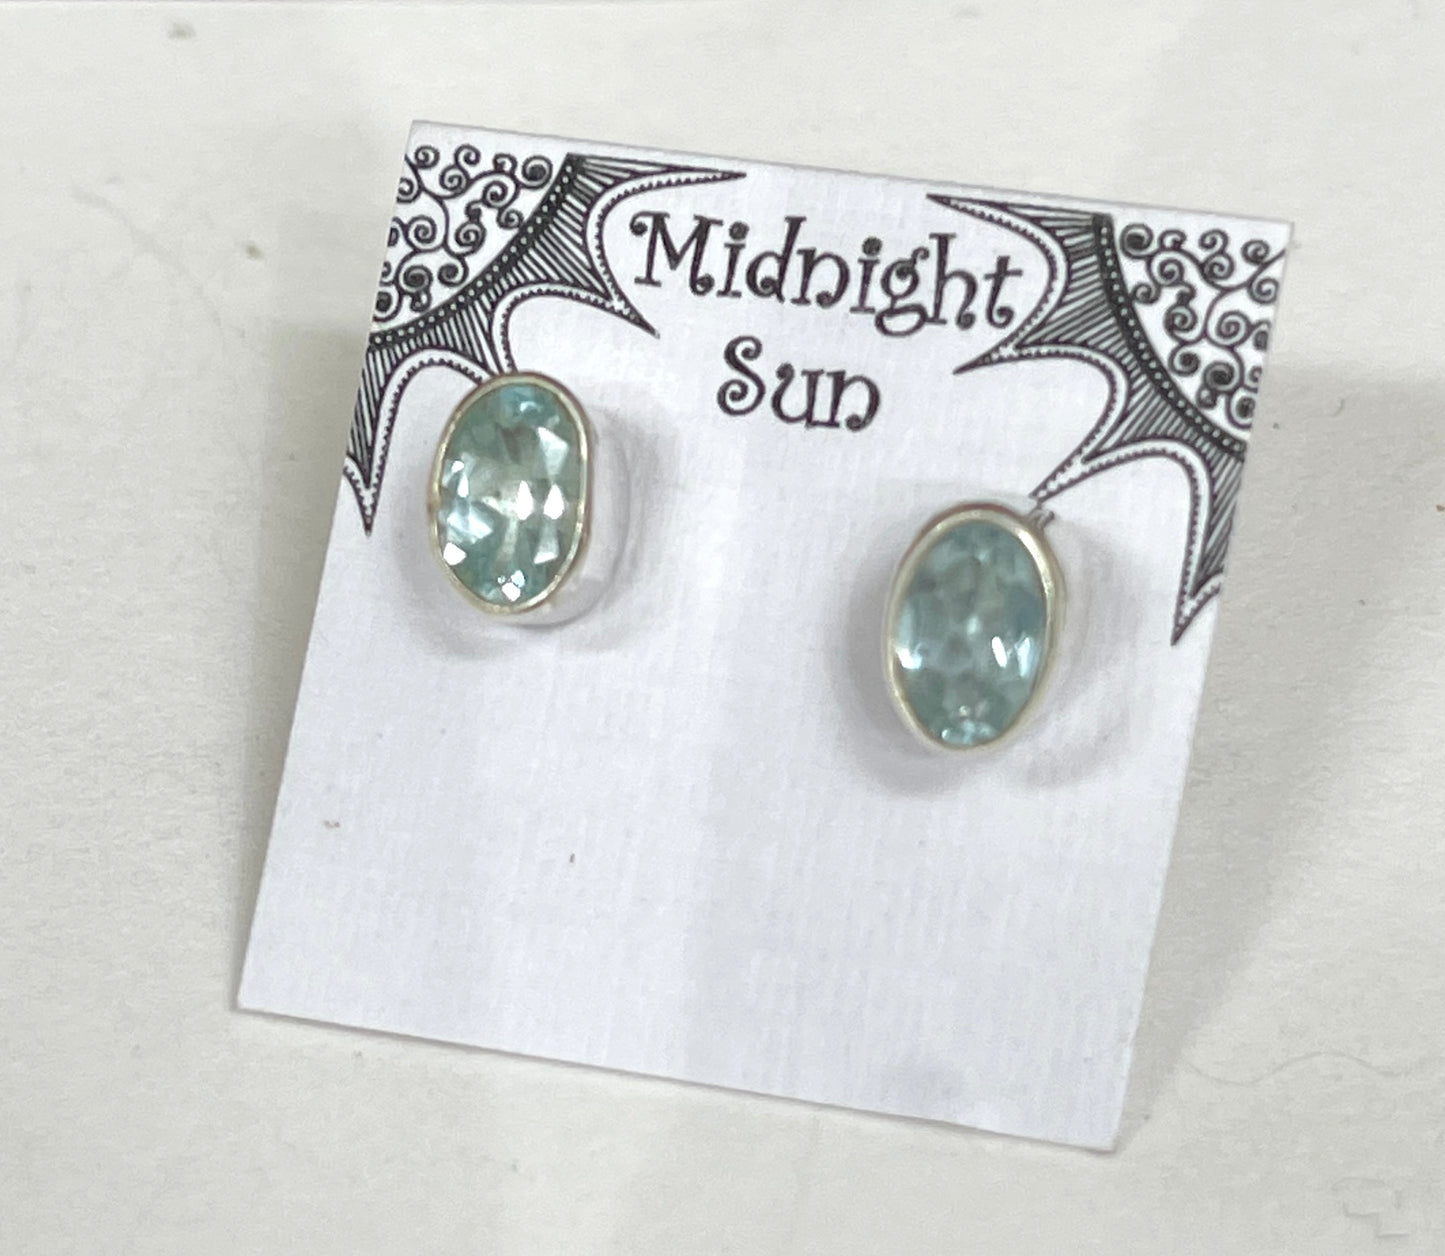 Blue Topaz Sterling Silver Stud Earrings - 6 Sizes Available